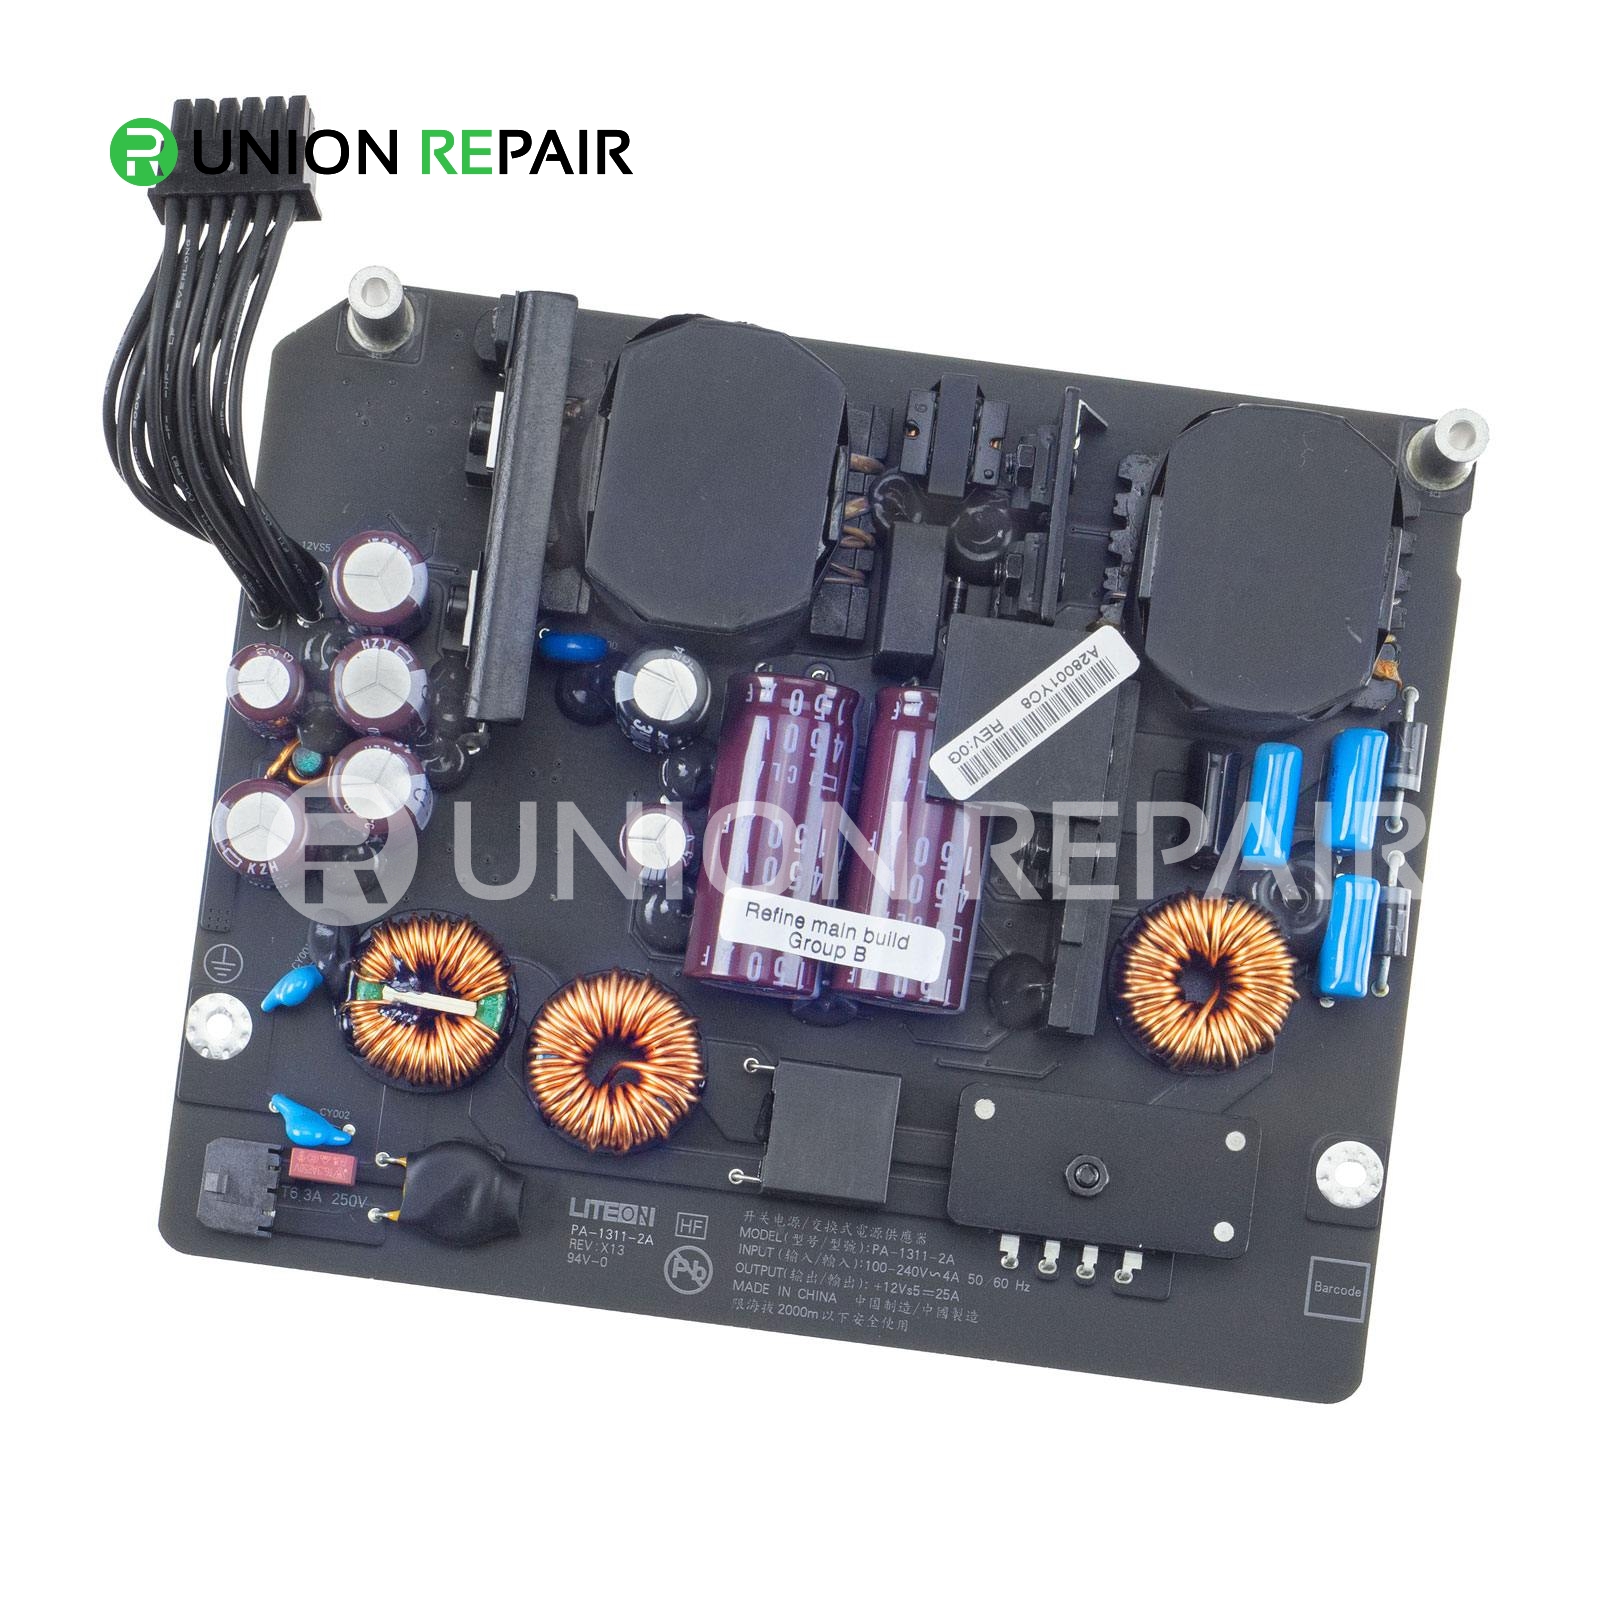 Power Supply (300W) for iMac 27" A1419 (Late 2013, Mid 2015)